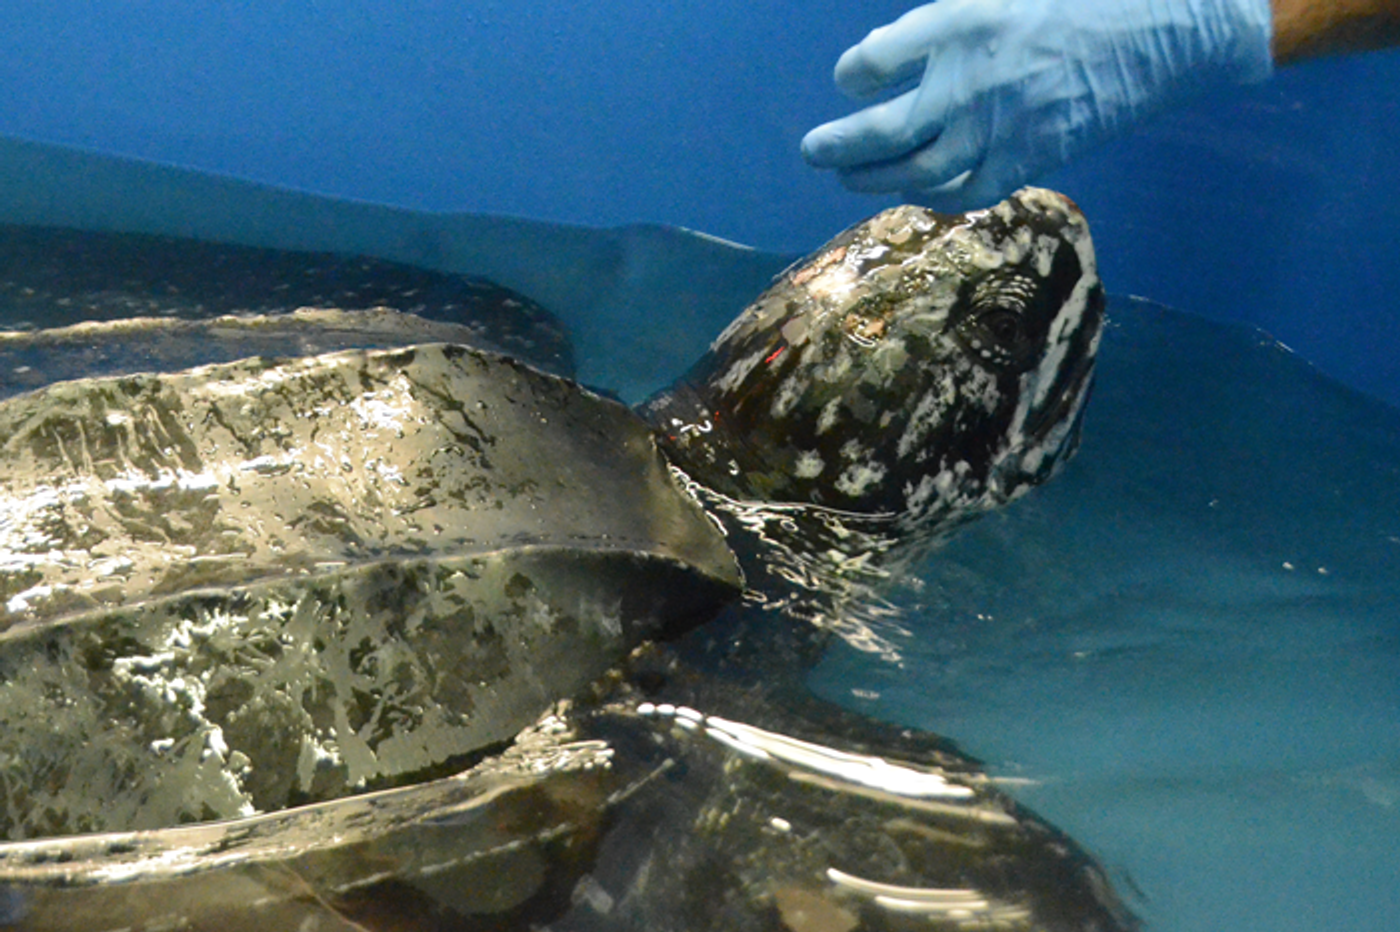 A helping hand to a rare leatherback turtle rescued in South Carolina